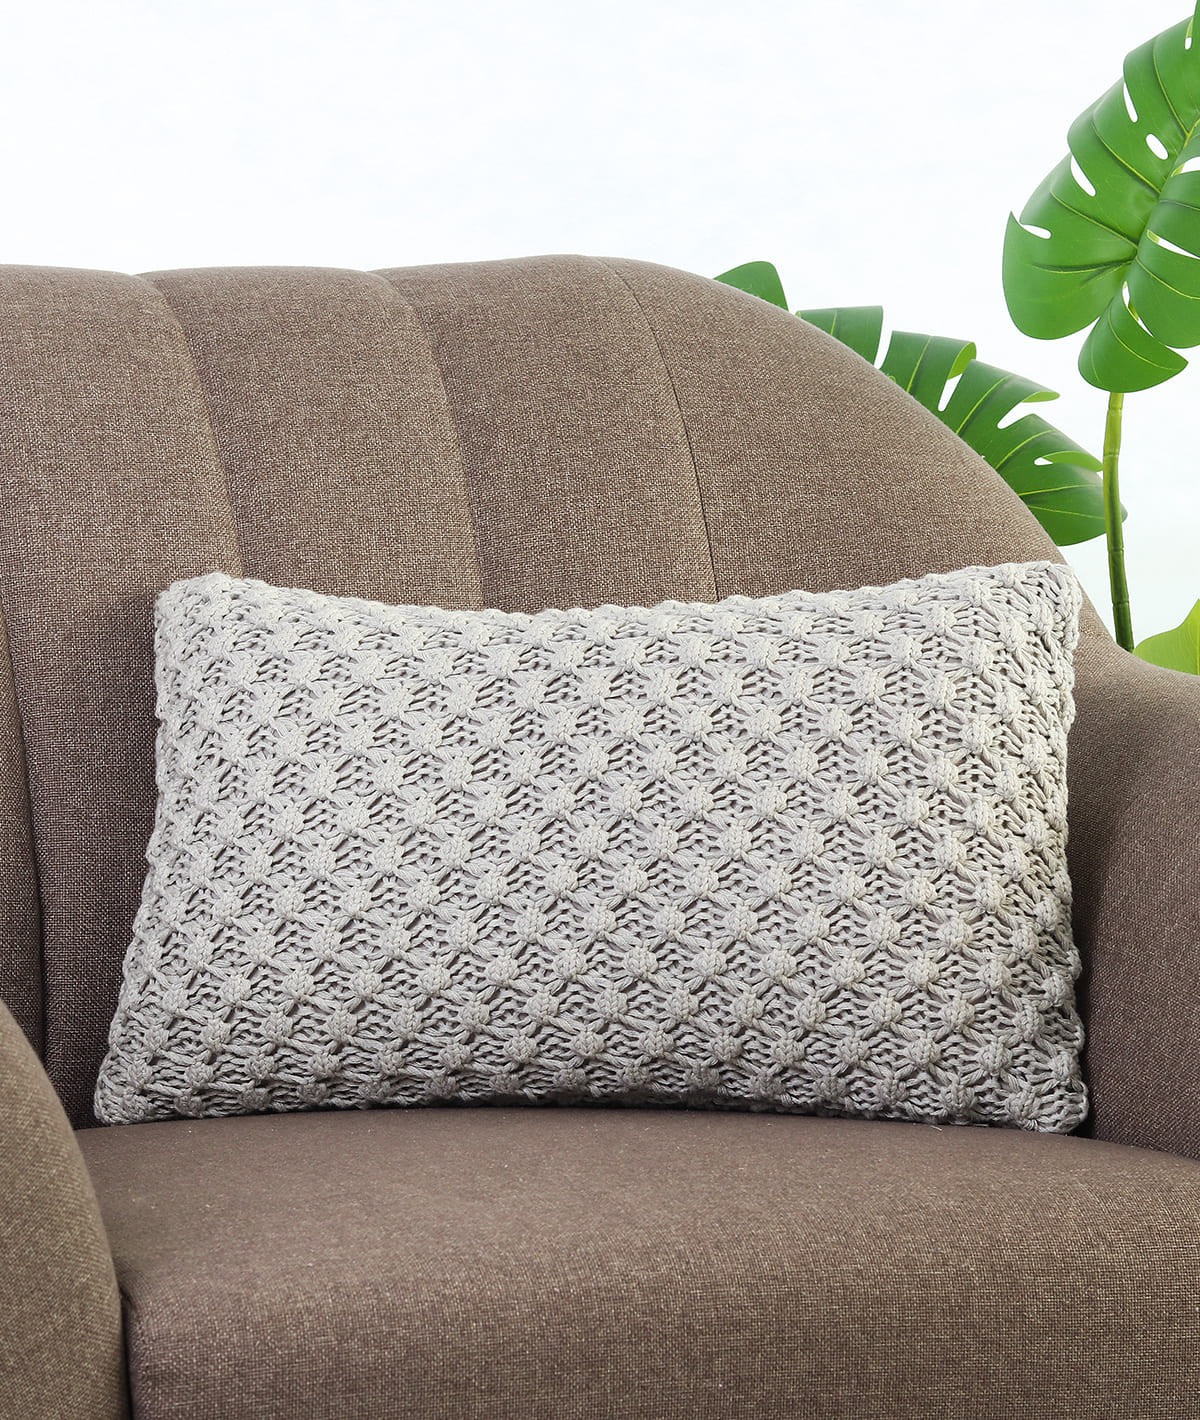 Popcorn Knit Vanilla Grey Melange Cotton Knitted Decorative 12 X 20 Inches Cushion Cover